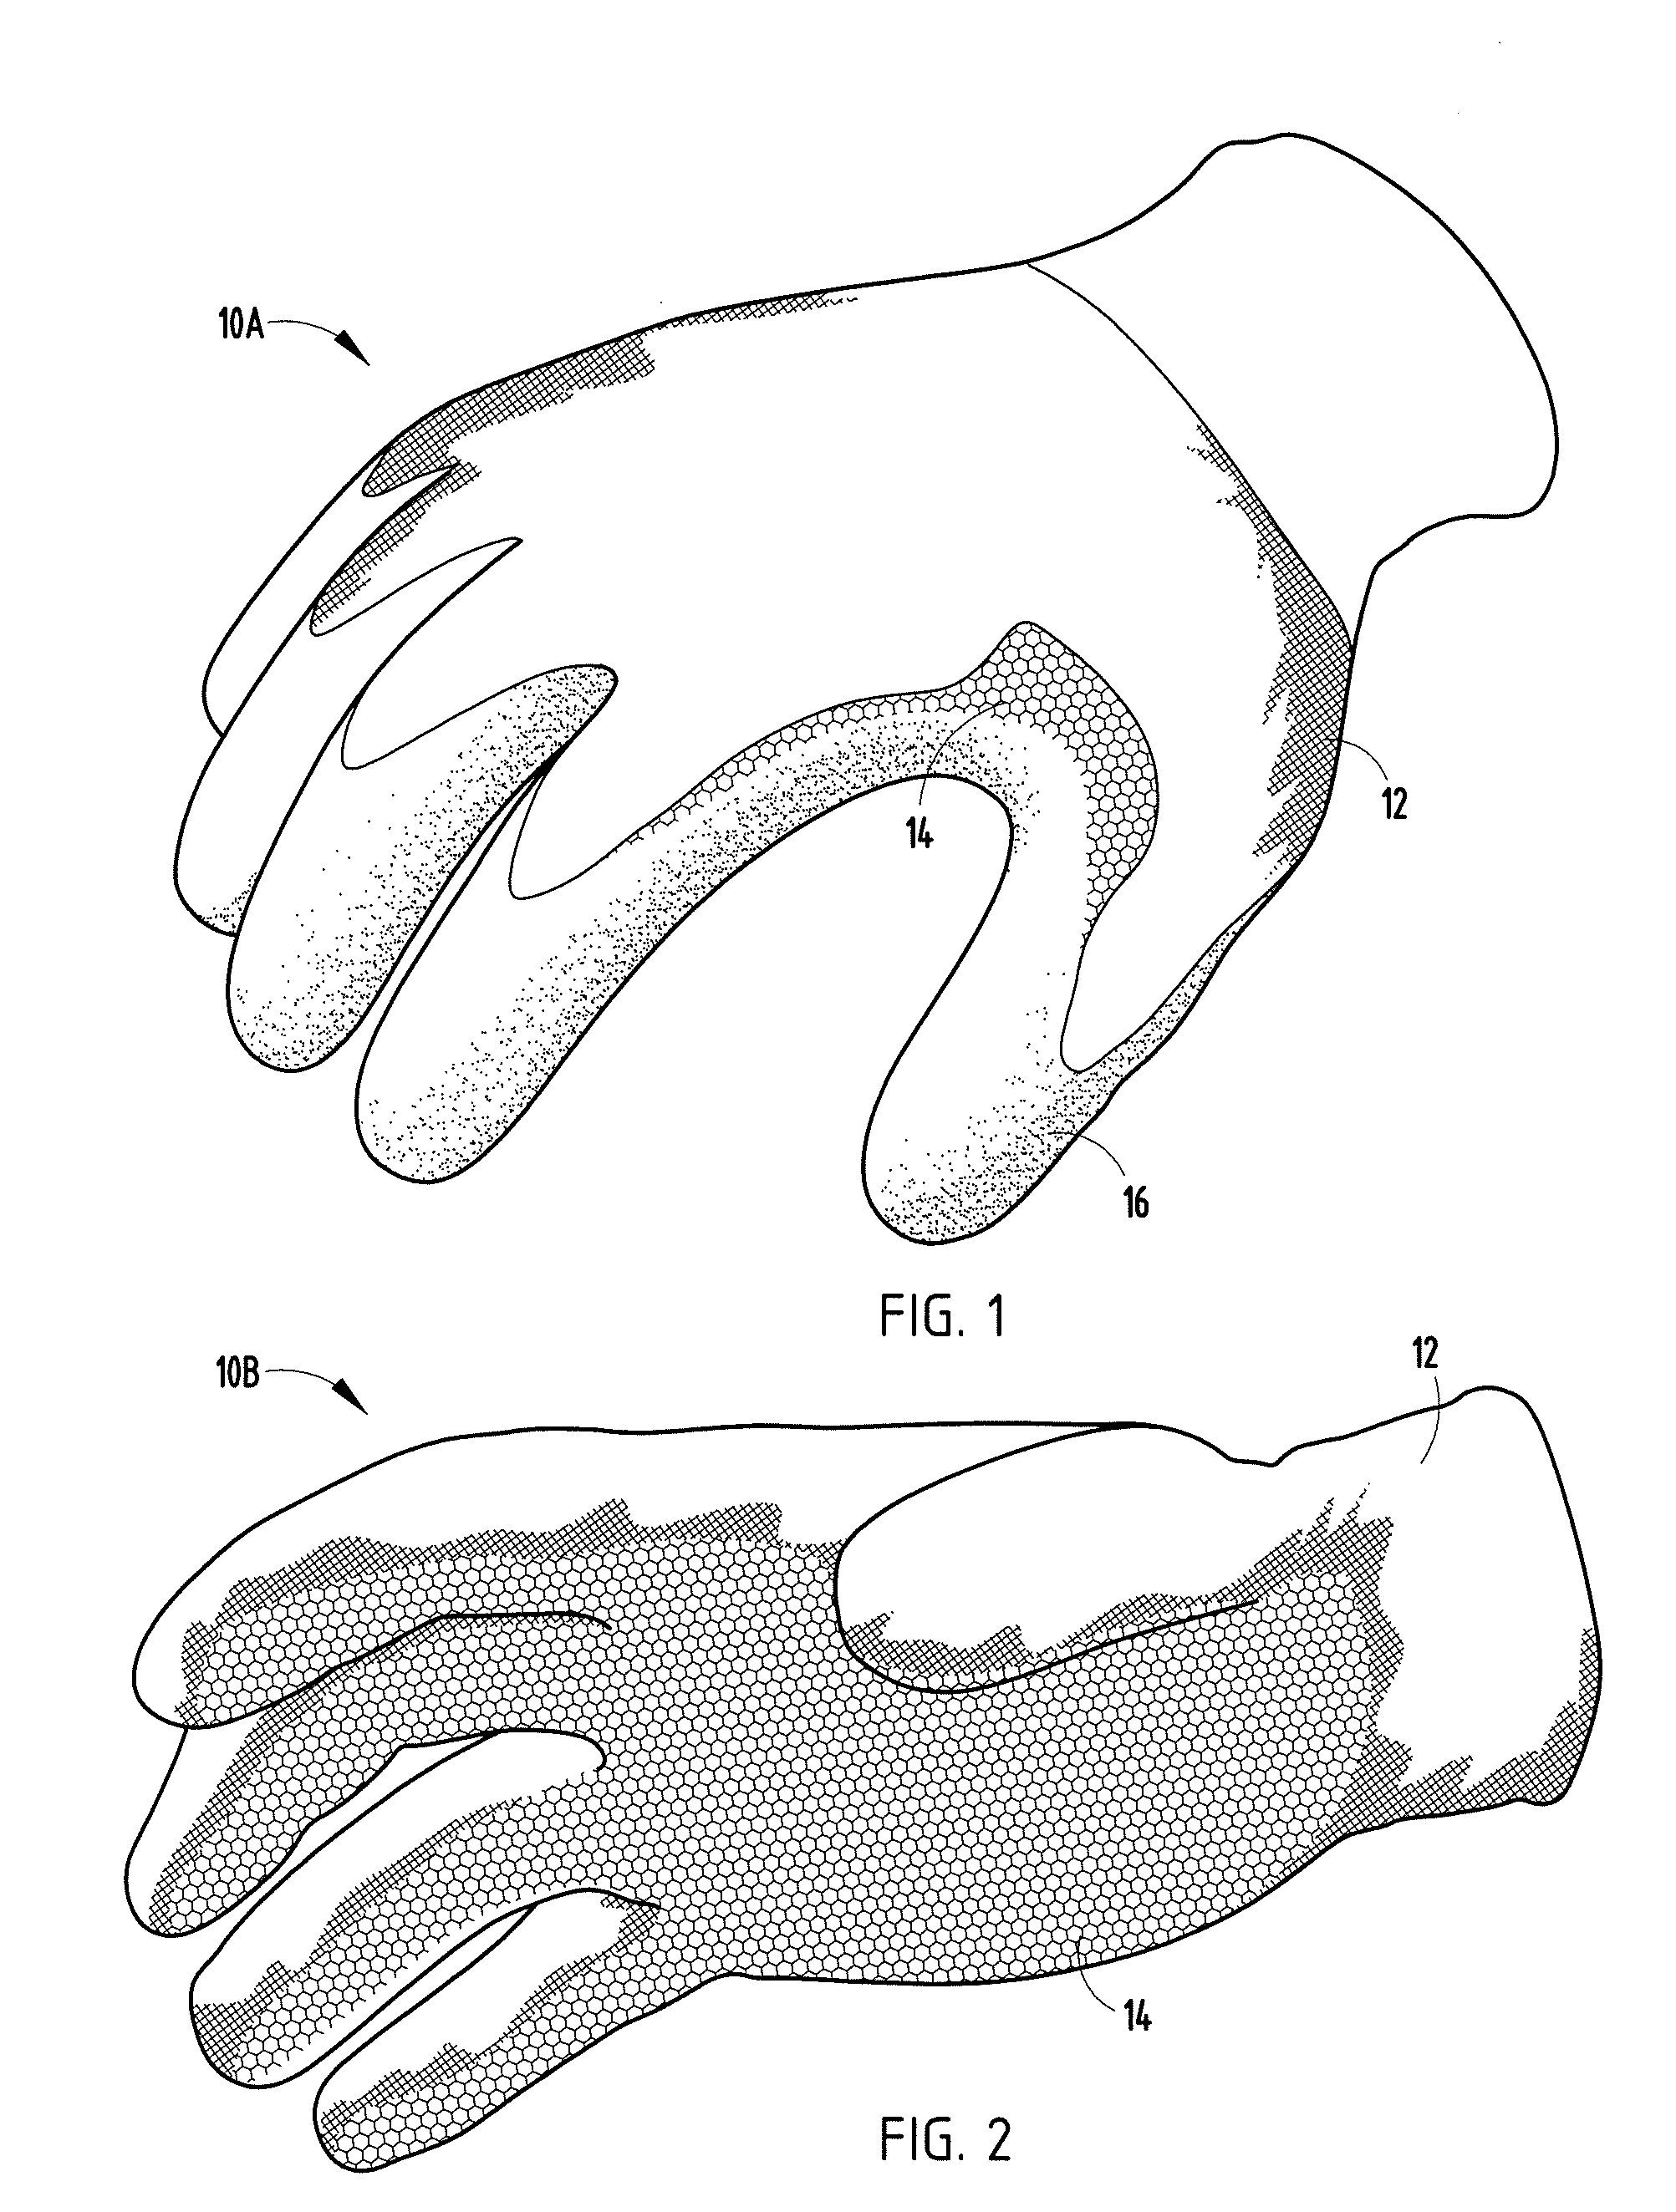 Protective knit gloves